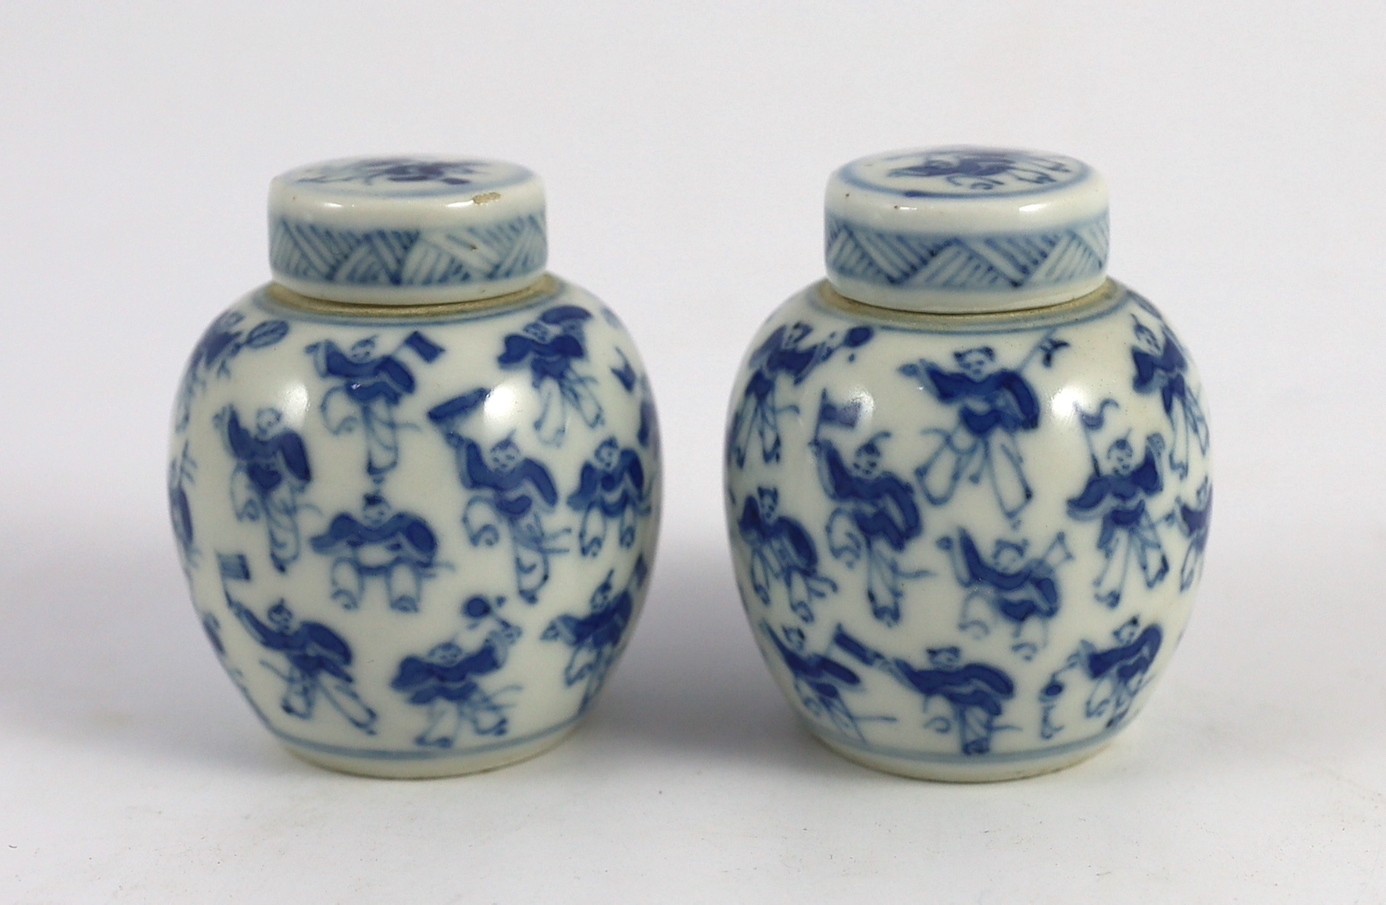 A pair of 19th century Chinese blue and white boys miniature jars and covers, 5.5 cm high - Image 2 of 5